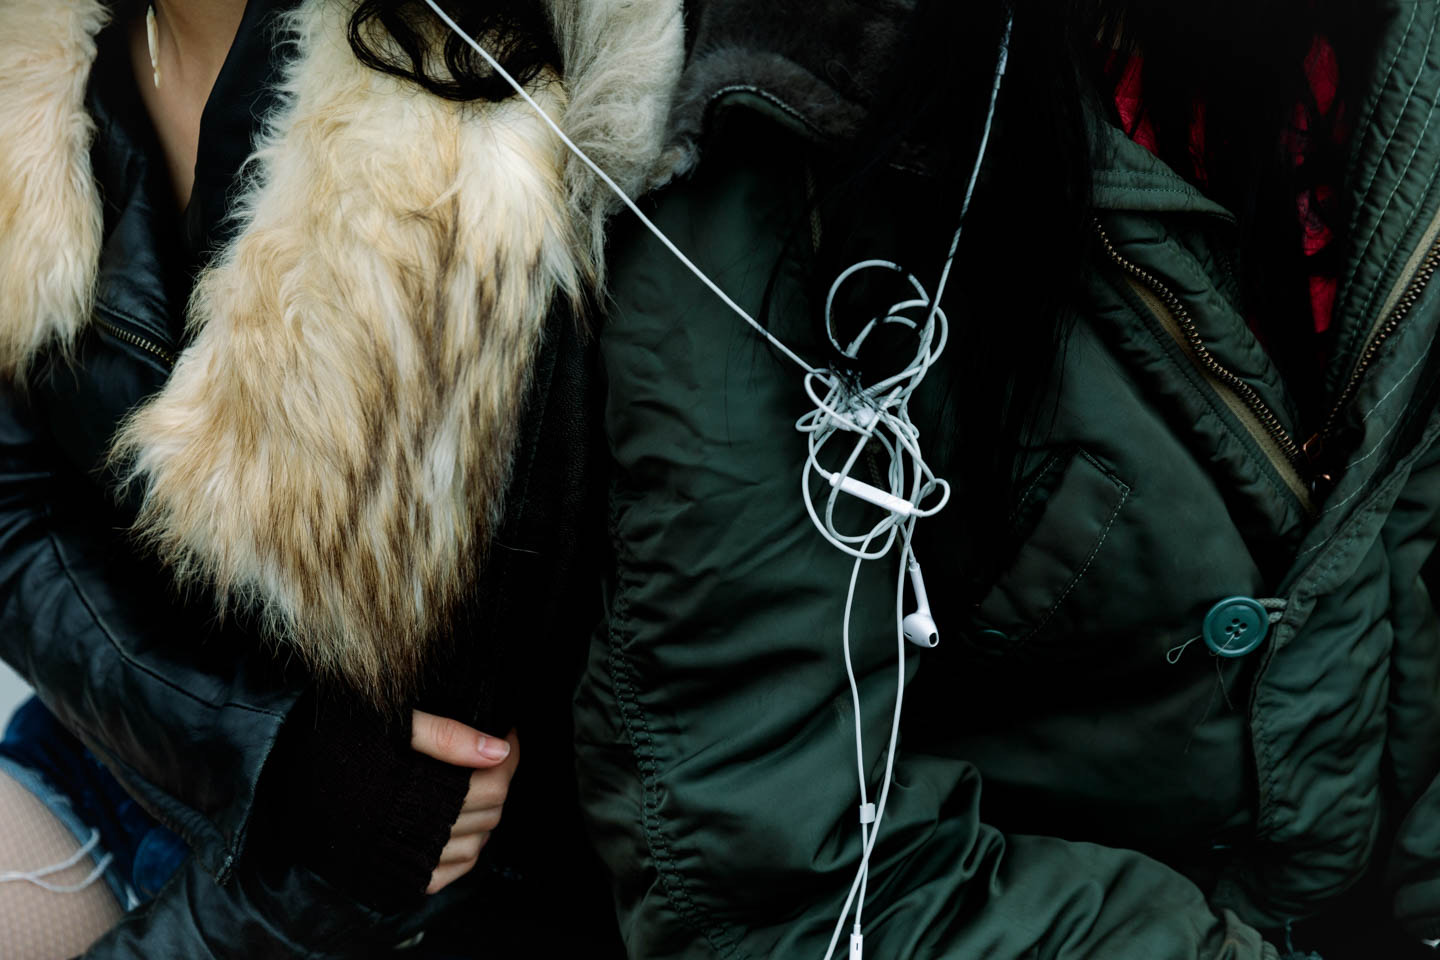 Two people sit together with tangled headphones in between them.